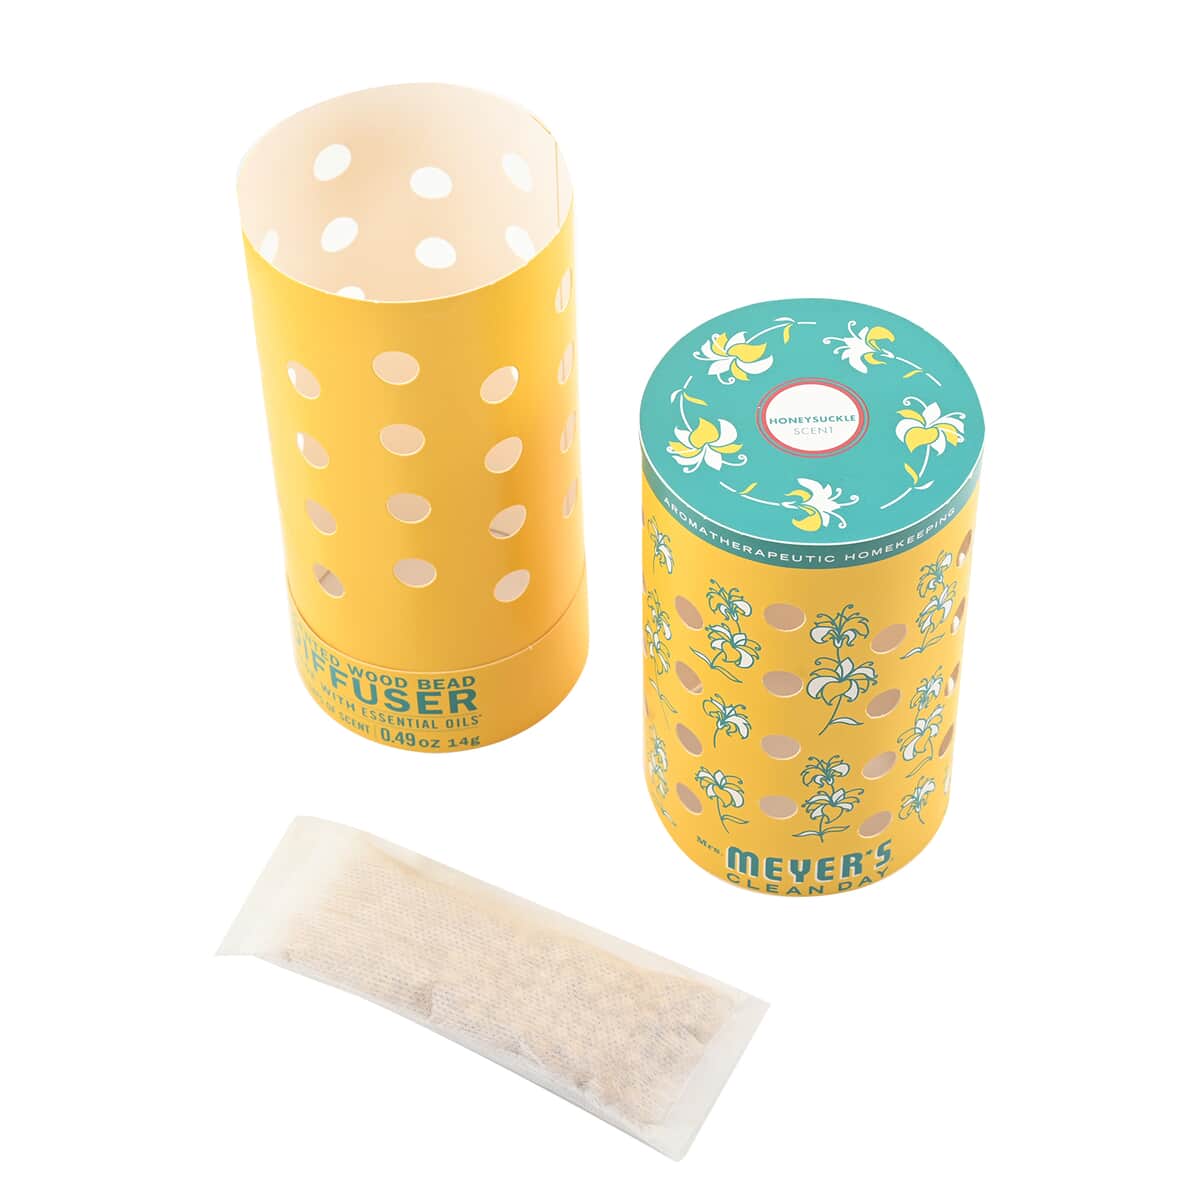 Mrs. Meyer's Clean Day Scented Wood Bead Diffuser Honeysuckle - 0.49oz  image number 3